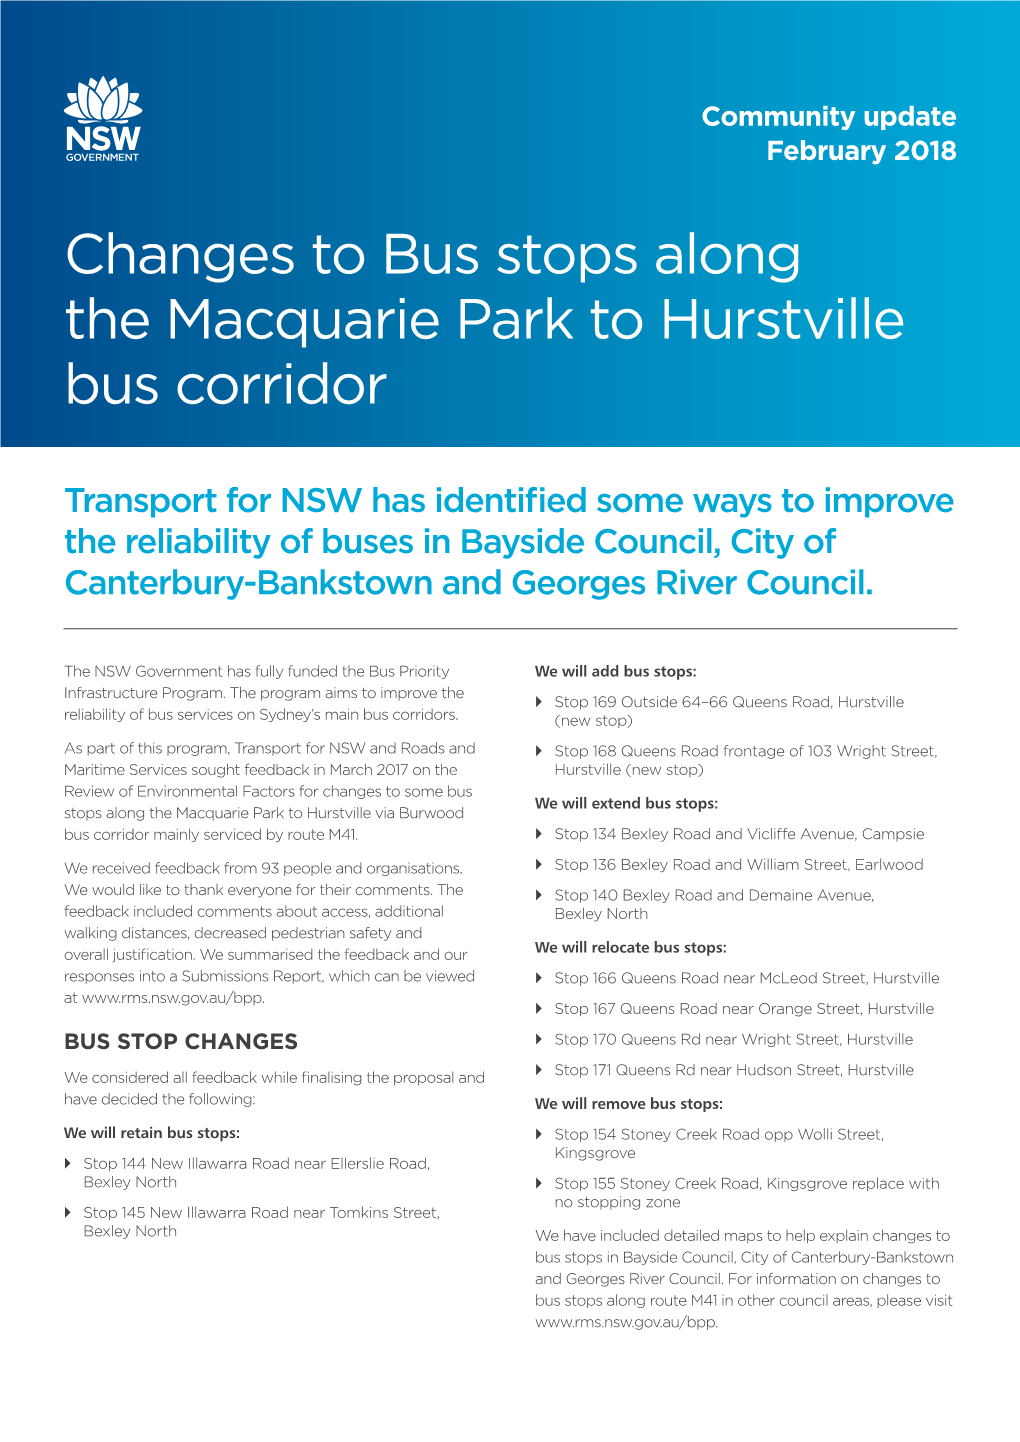 Macquarie Pack to Hurstville Bus Stop Changes Bayside Council, City Canterbury-Bankstown and Georges River Councikl